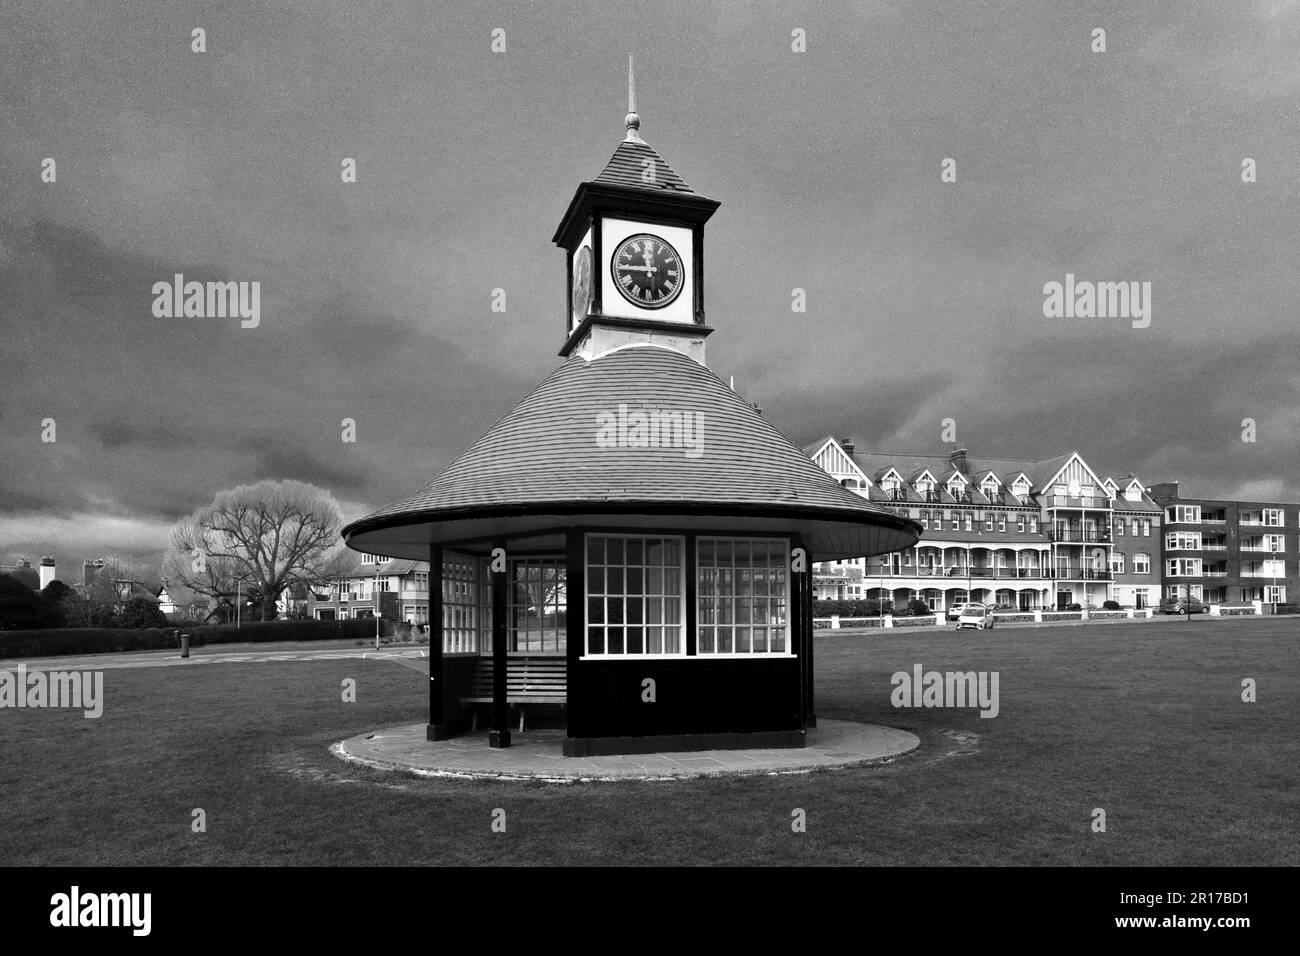 The Clock tower on the promenade at Frinton-on-Sea, Tendring district, Essex, England, UK Stock Photo